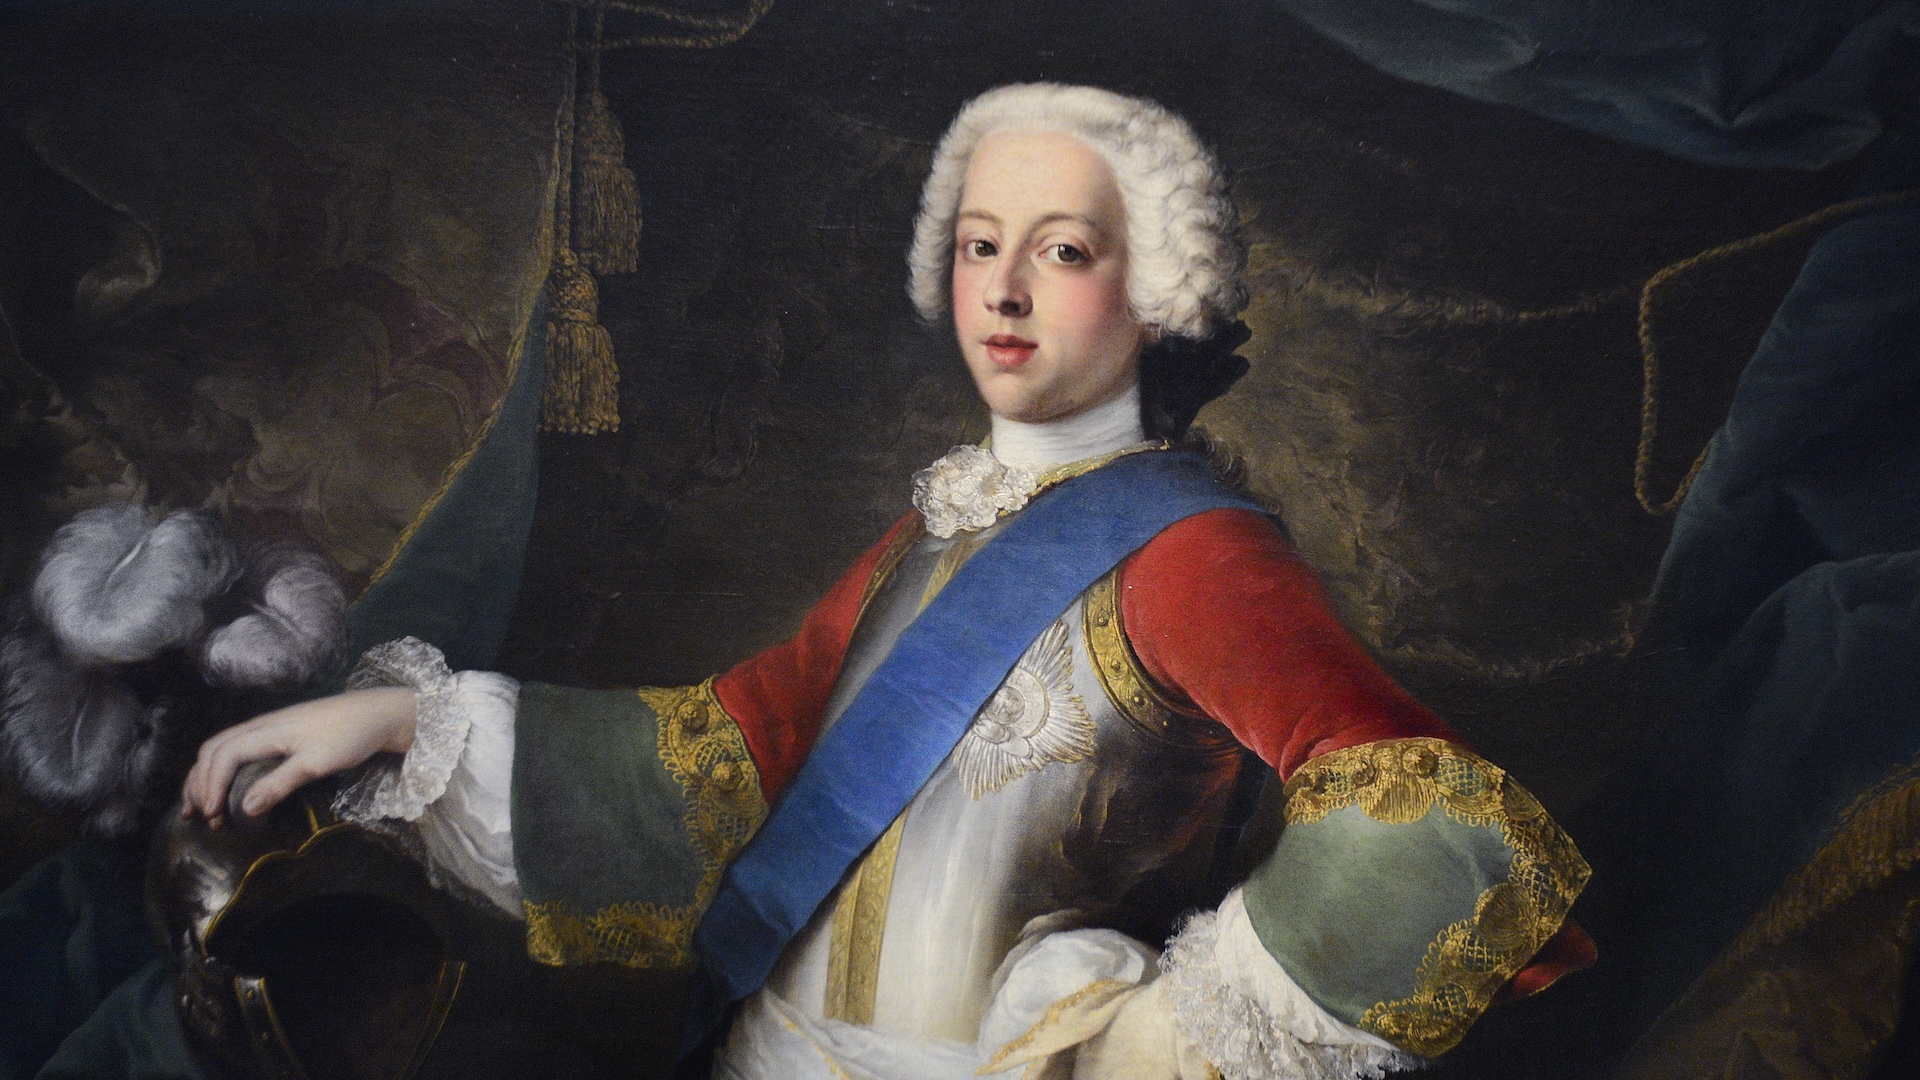  Bonnie Prince Charlie narrowly escaped an assassination attempt in Scotland in 1745, musket ball hole reveals 